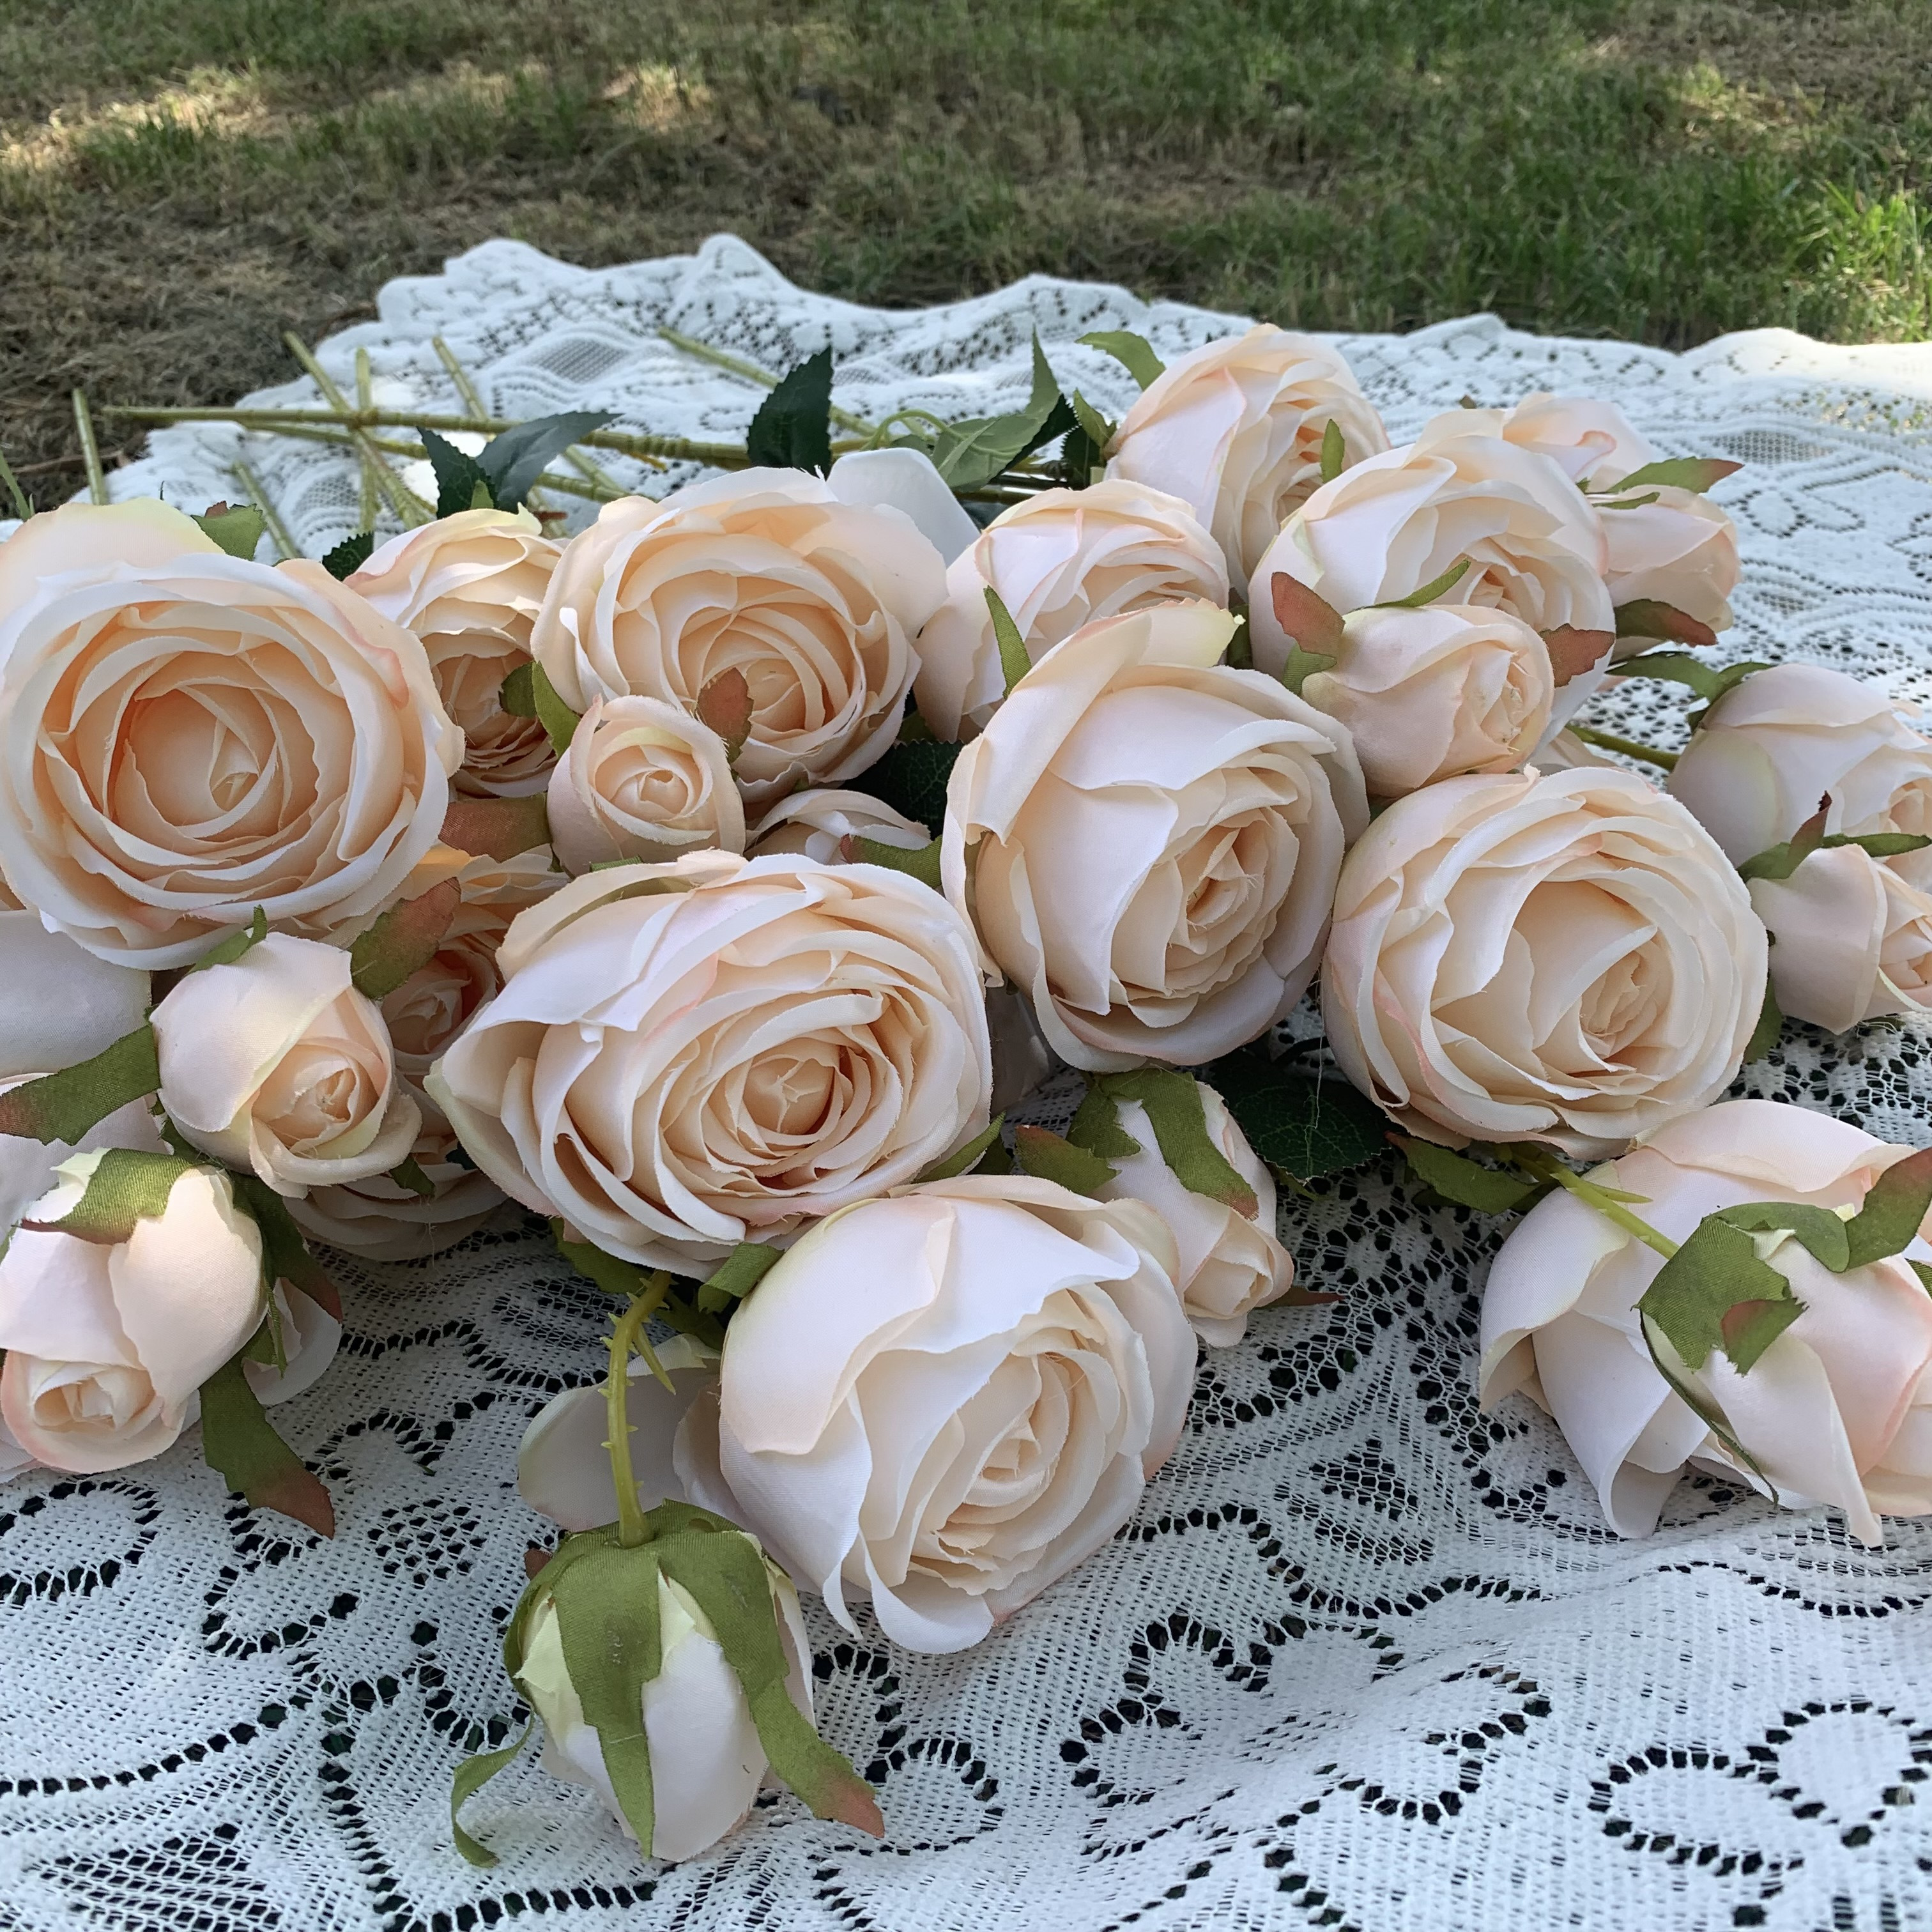 Velvety Artificial Roses Stems Faux Real Touch Rose Bouquet – the Peachy Day